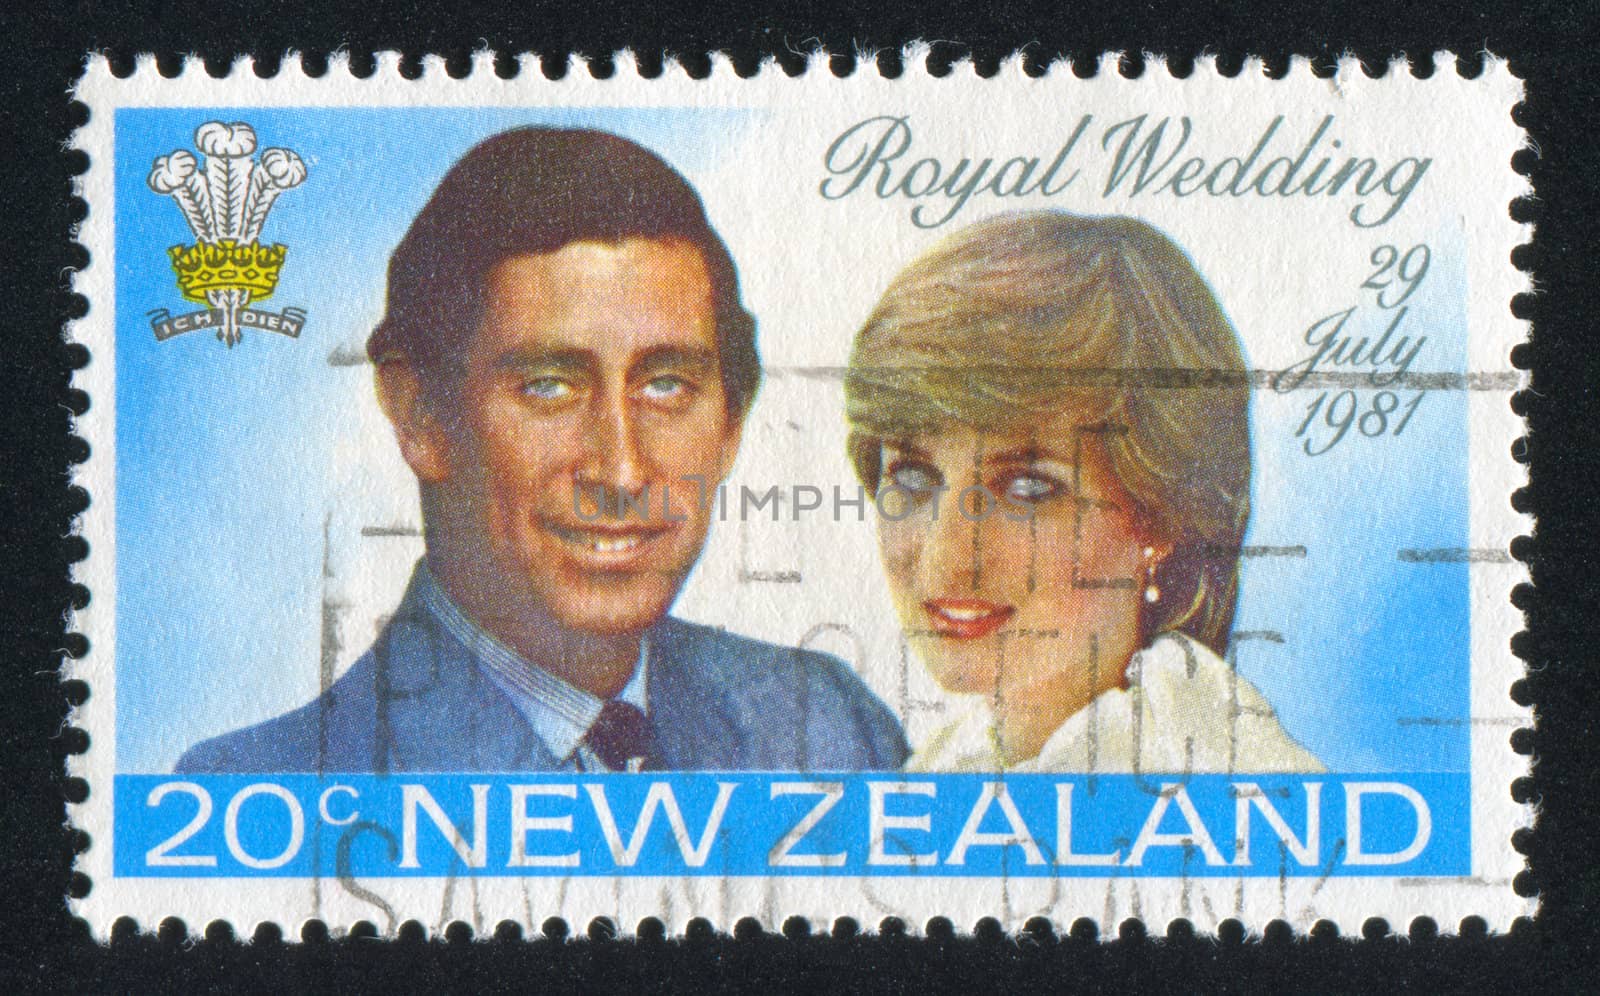 NEW ZEALAND - CIRCA 1981: stamp printed by New Zealand, shows Prince Charles and Lady Diana, circa 1981